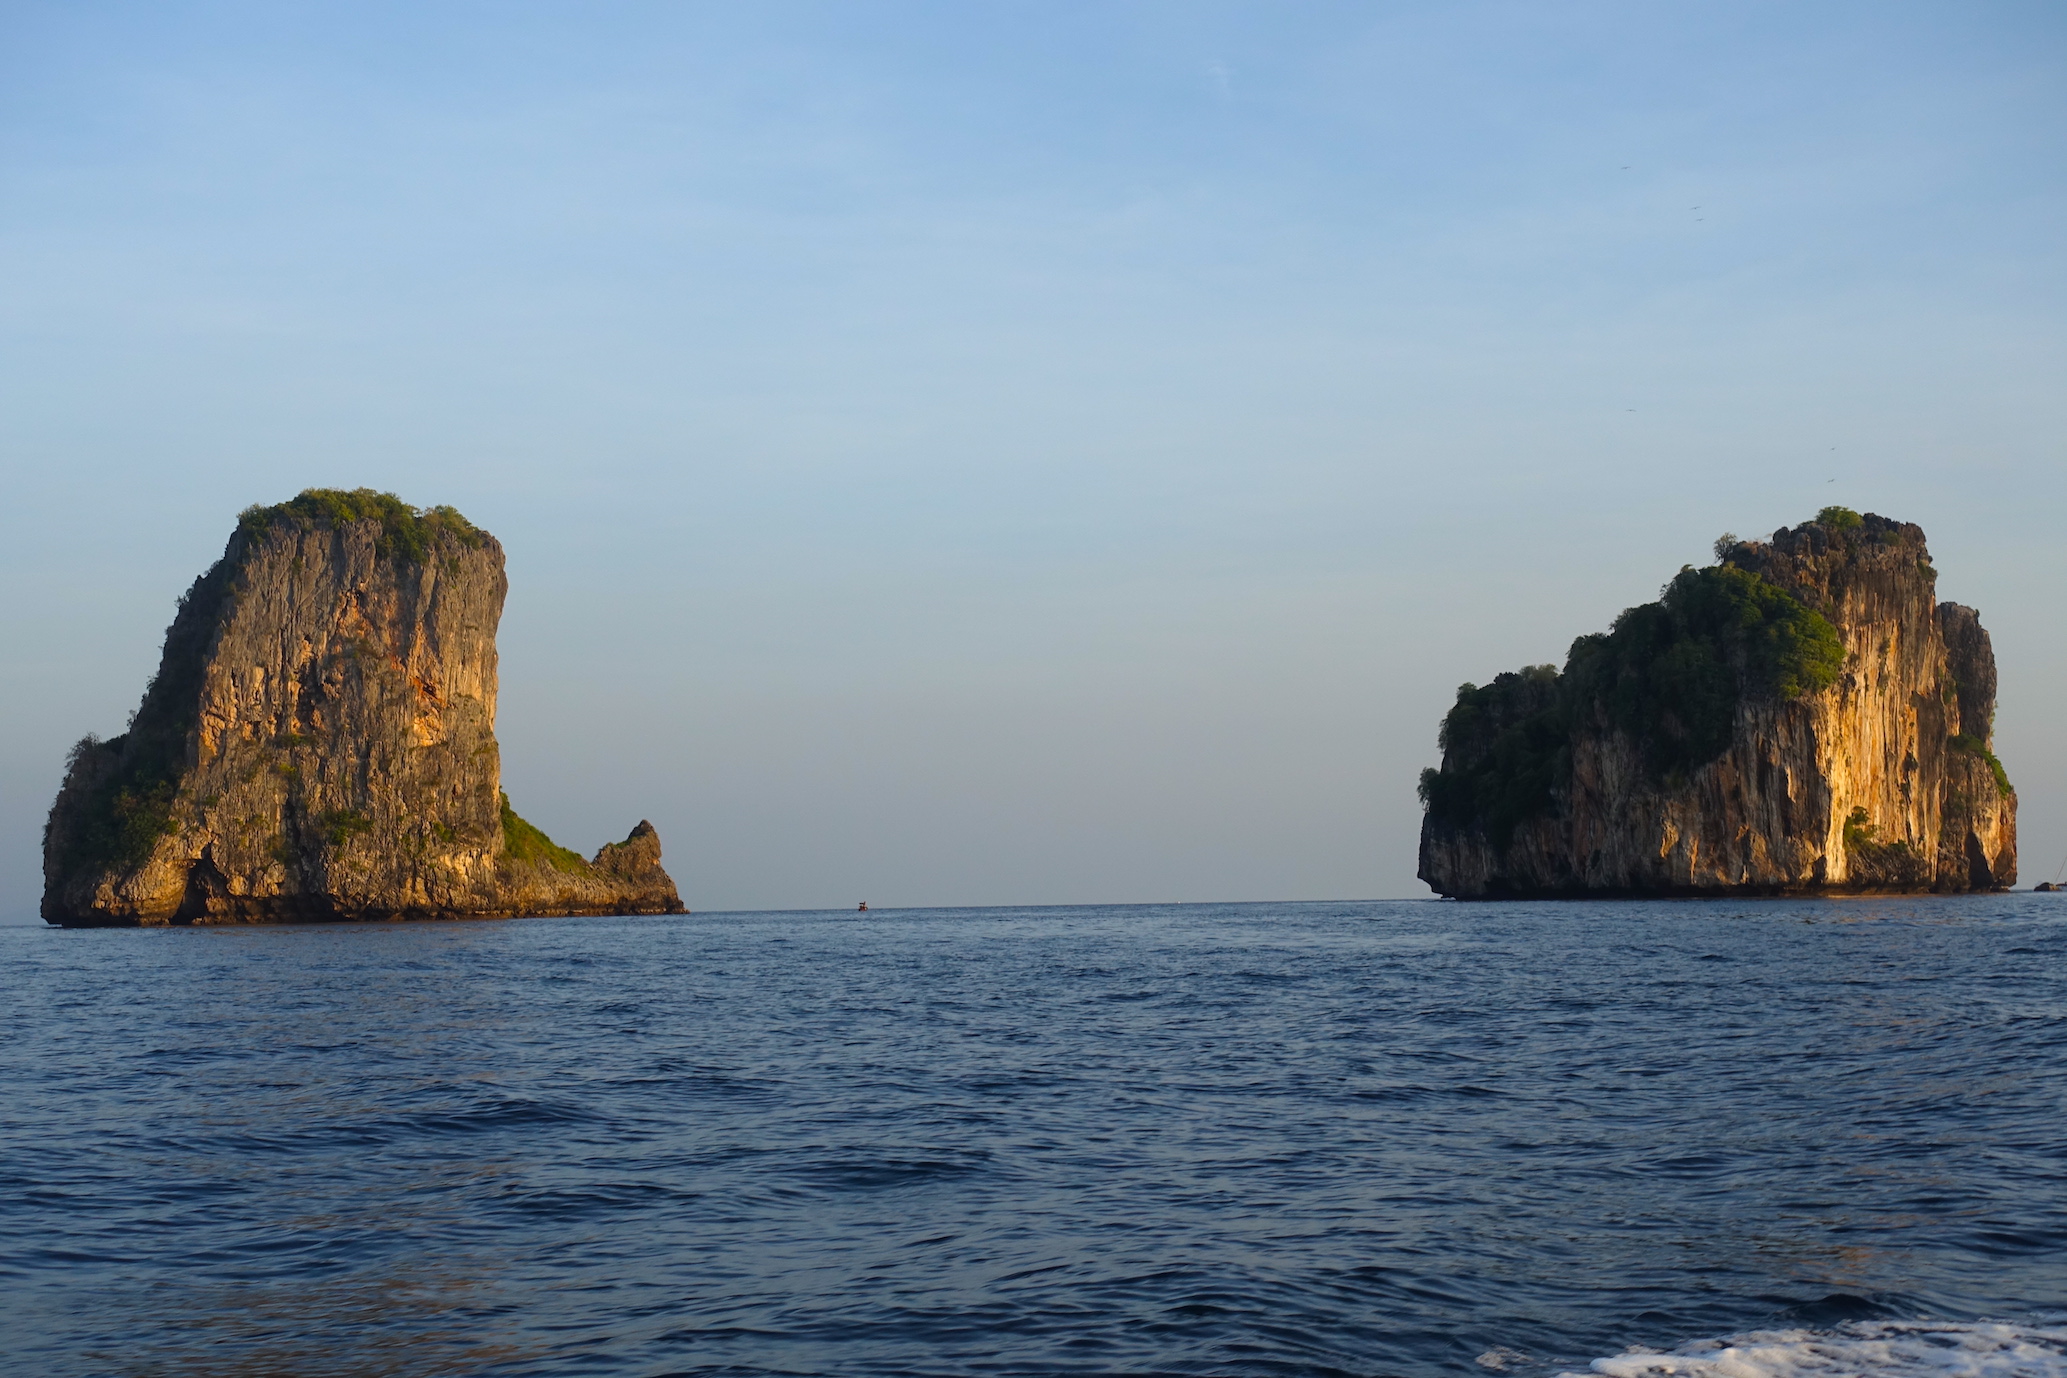 A view of the two rocks that are the Bida islands, in Phi Phi islands archipelago